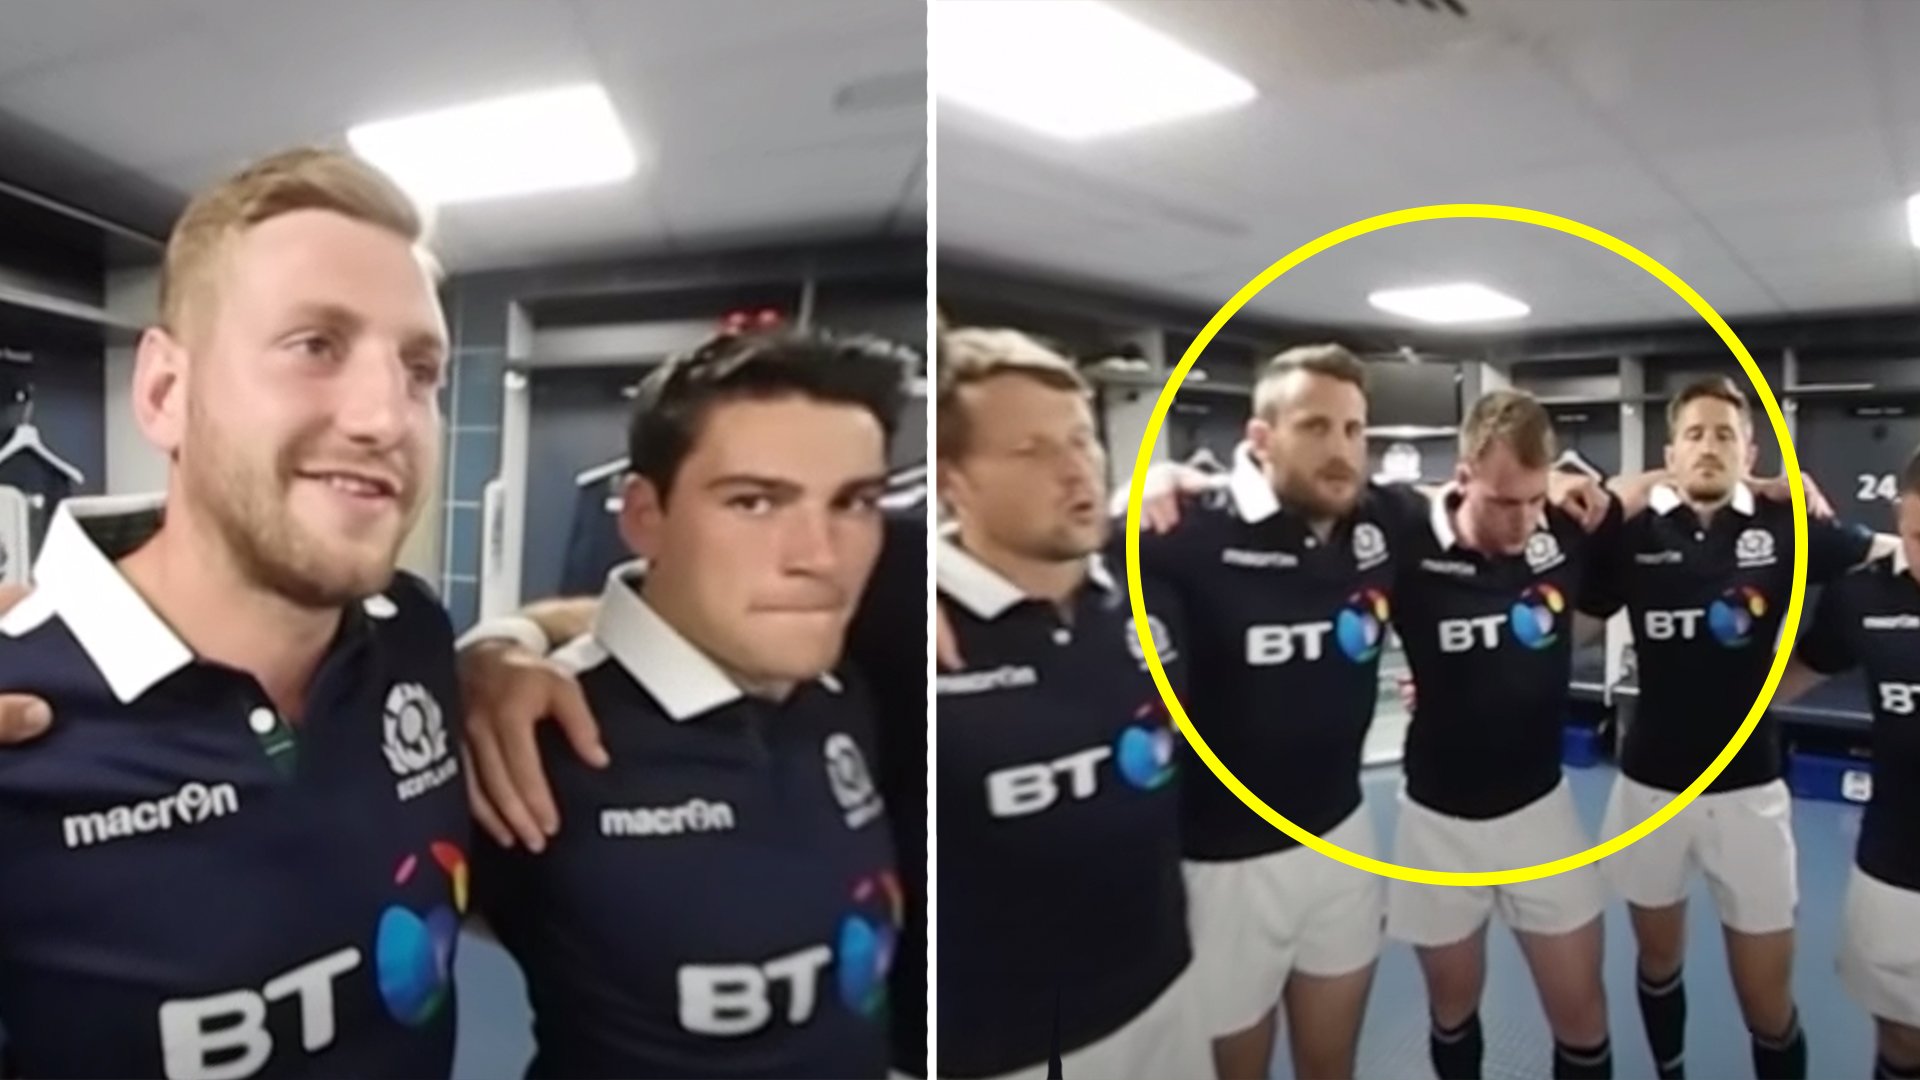 The Scotland rugby promo that was so bad it nearly bankrupted the Union